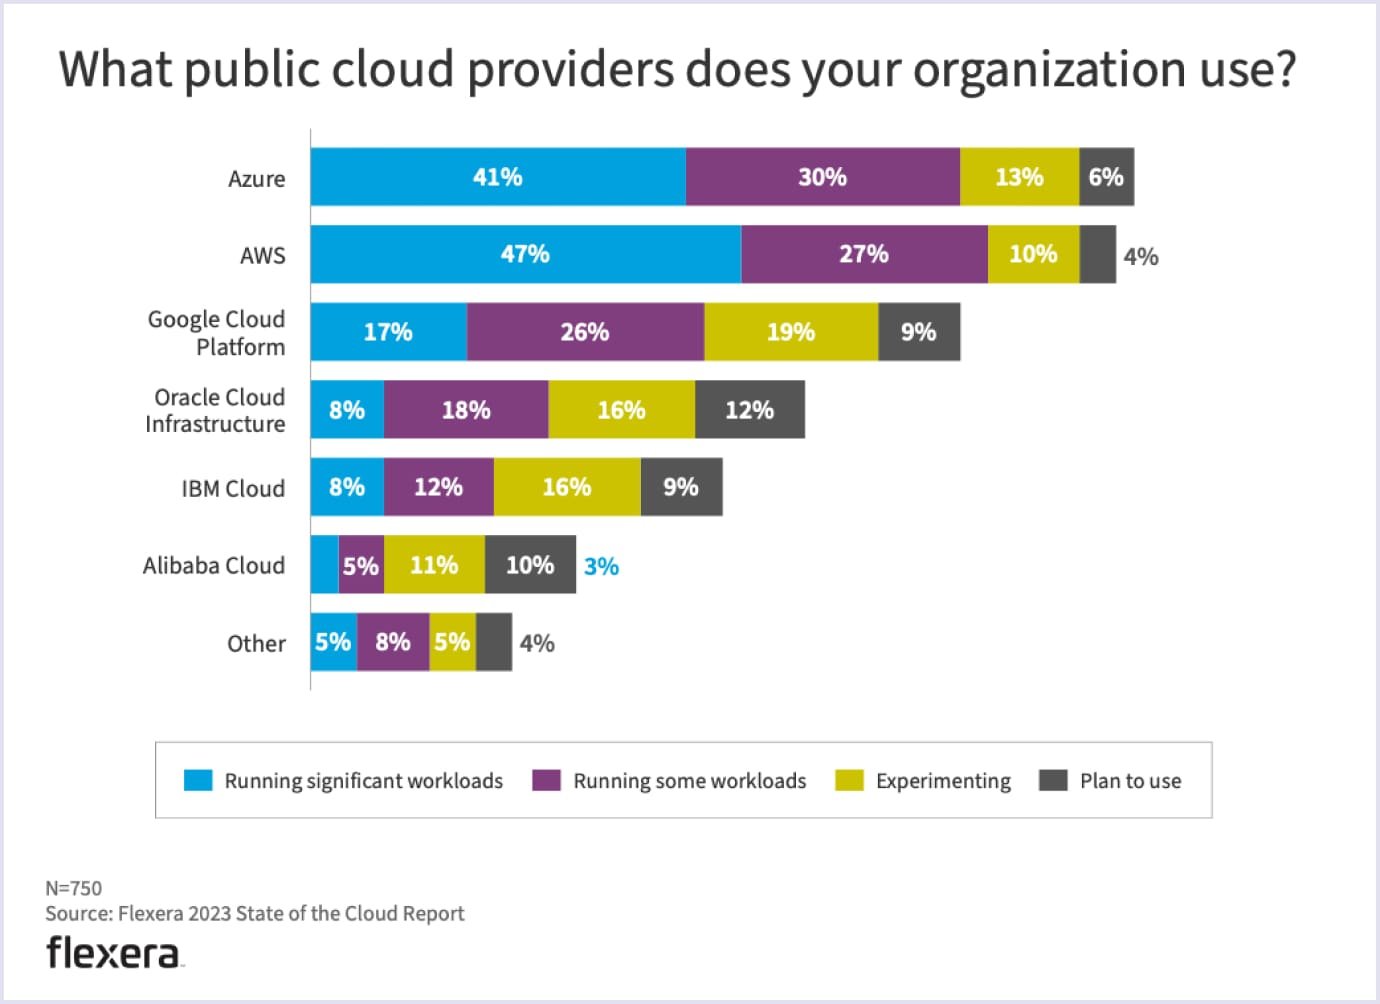 Public cloud provider adoption rates for organizations in 2023